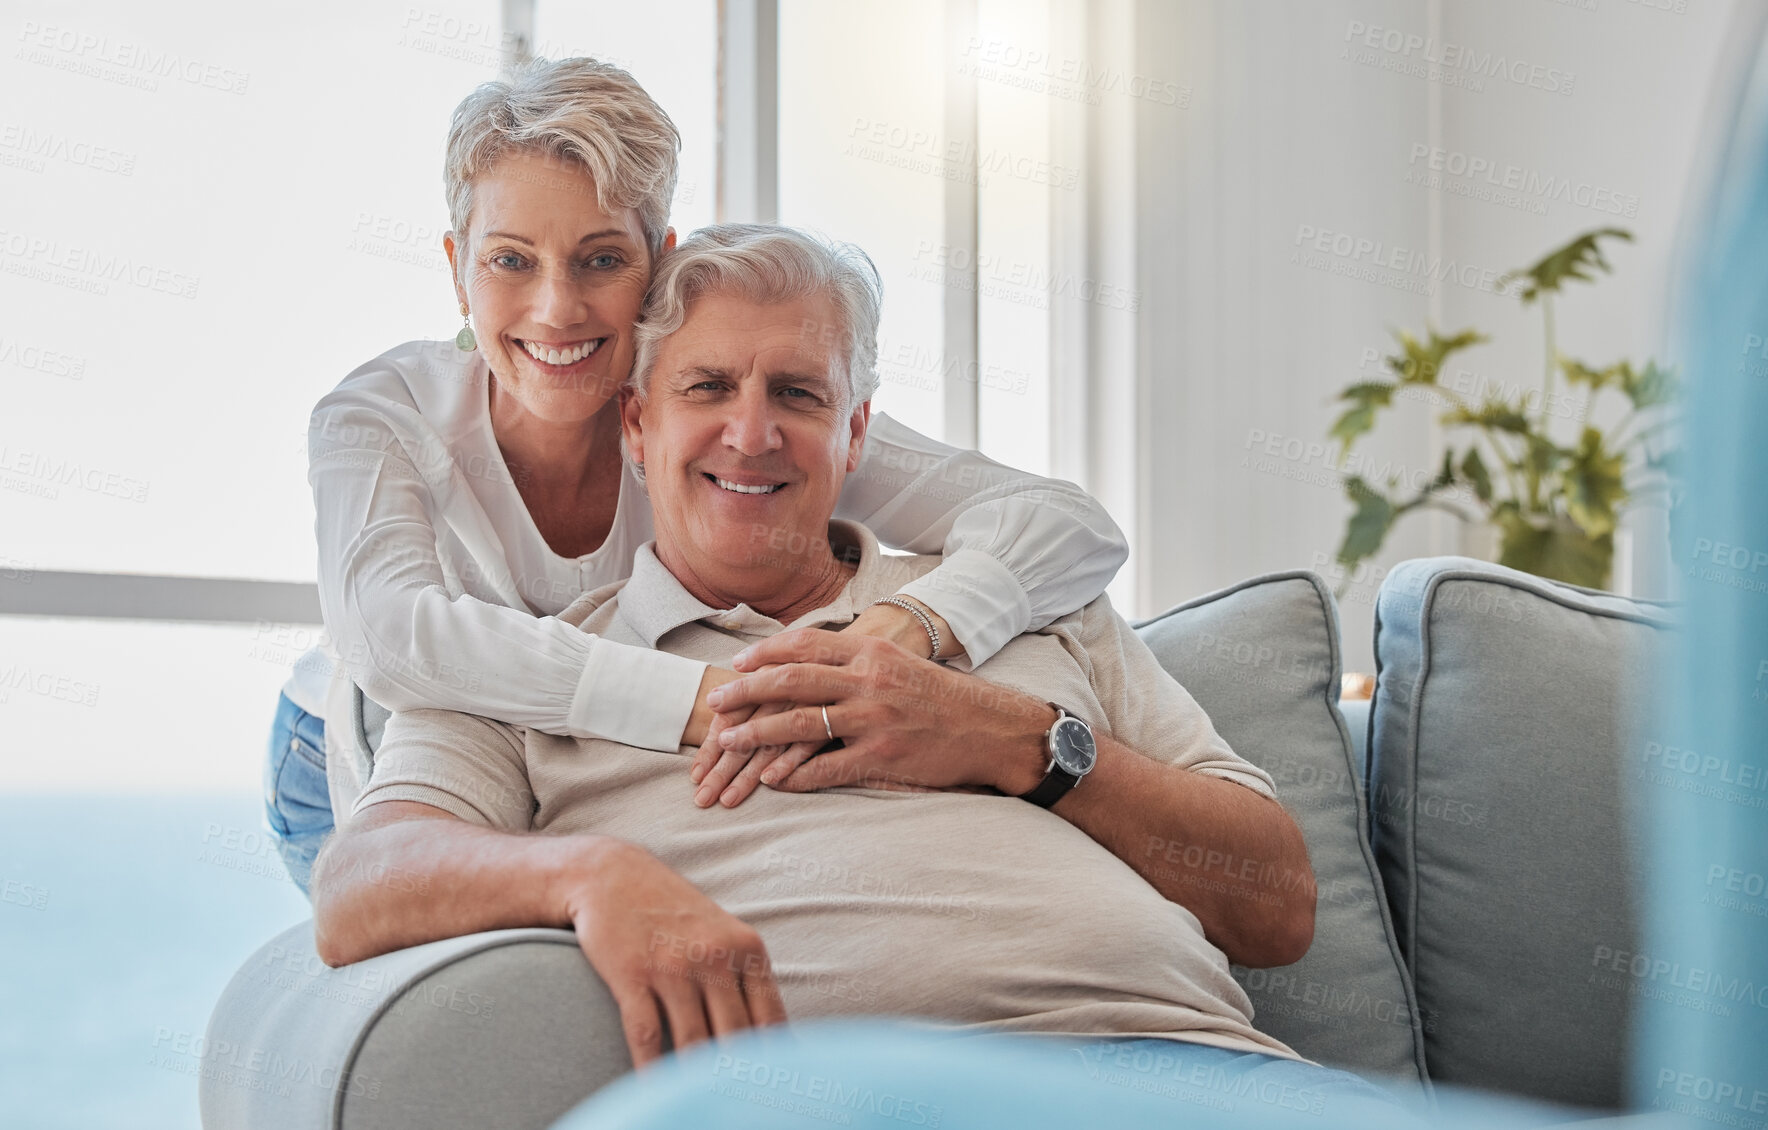 Buy stock photo Cropped portrait of an affectionate senior couple relaxing in their living room at home